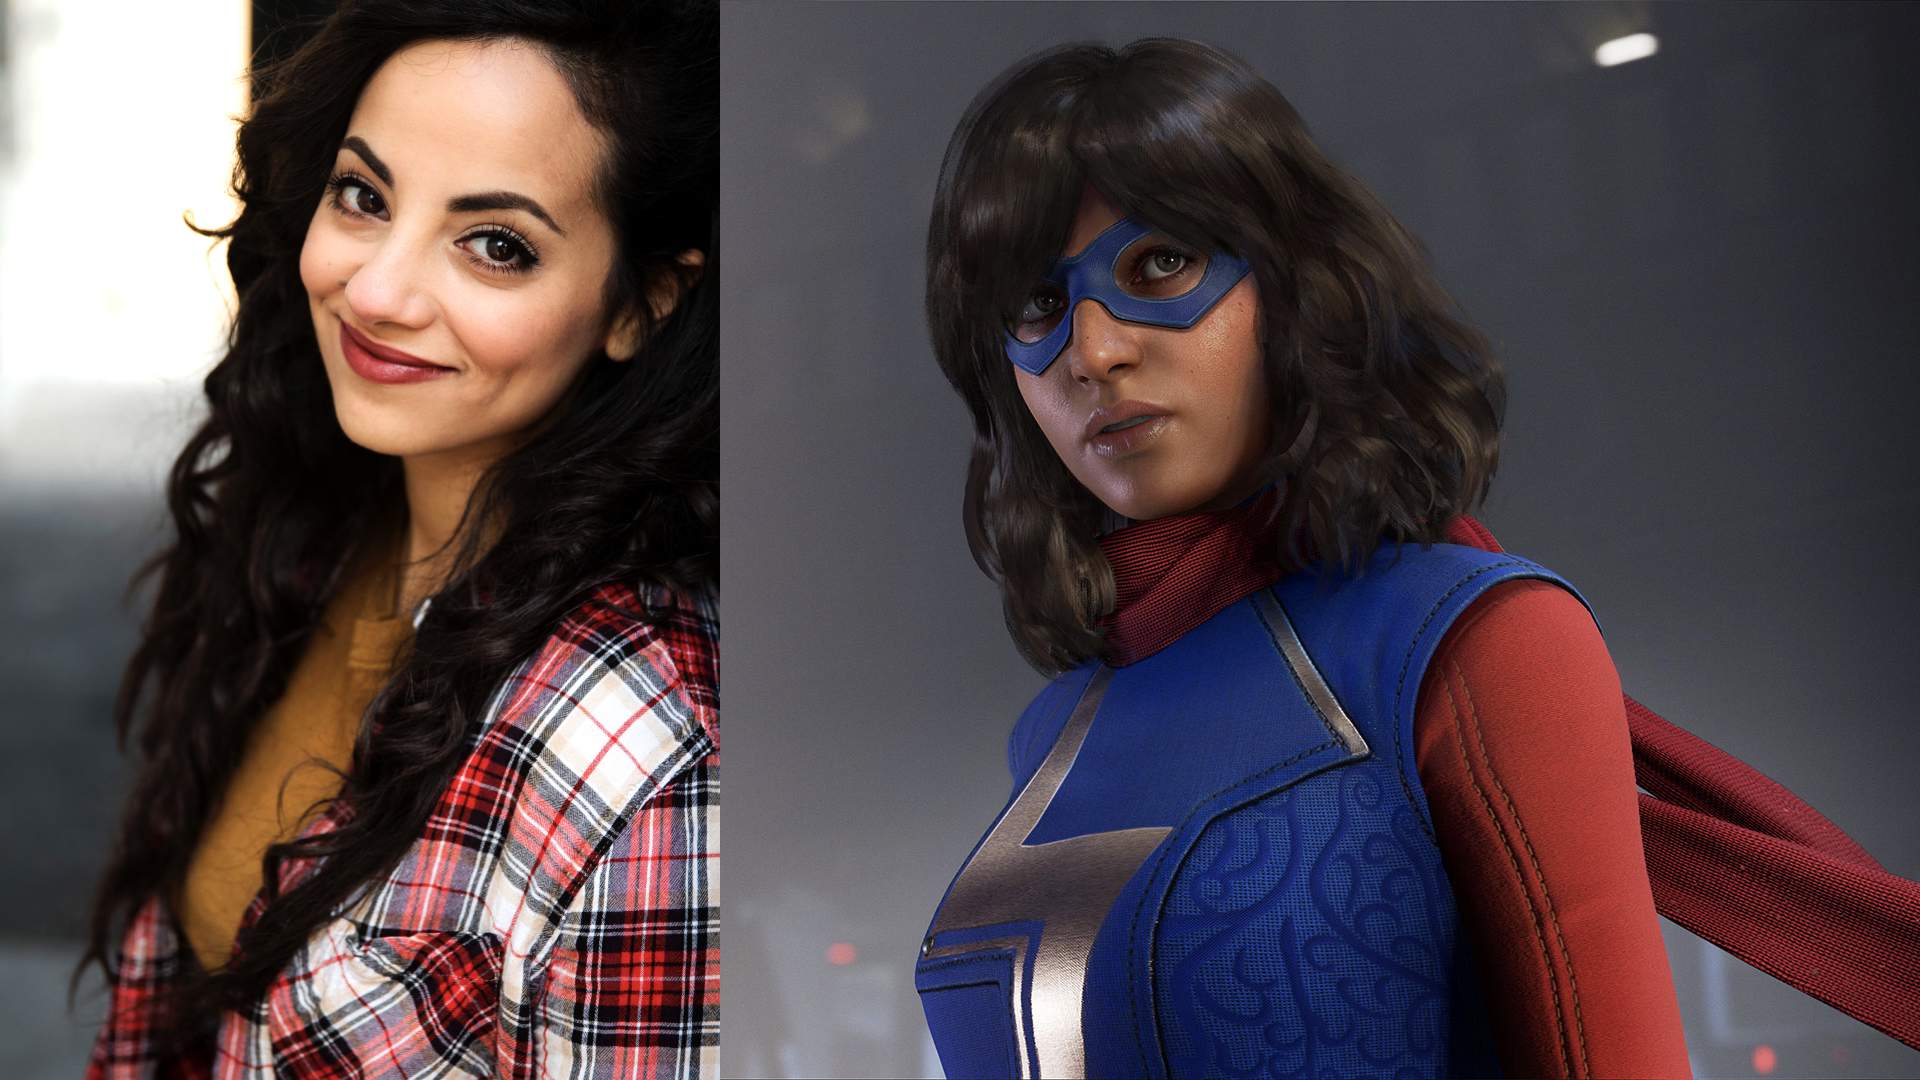 Marvel's Avengers Behind the Performance - a conversation with Sandra Saad,  actor of Kamala Khan | Square Enix